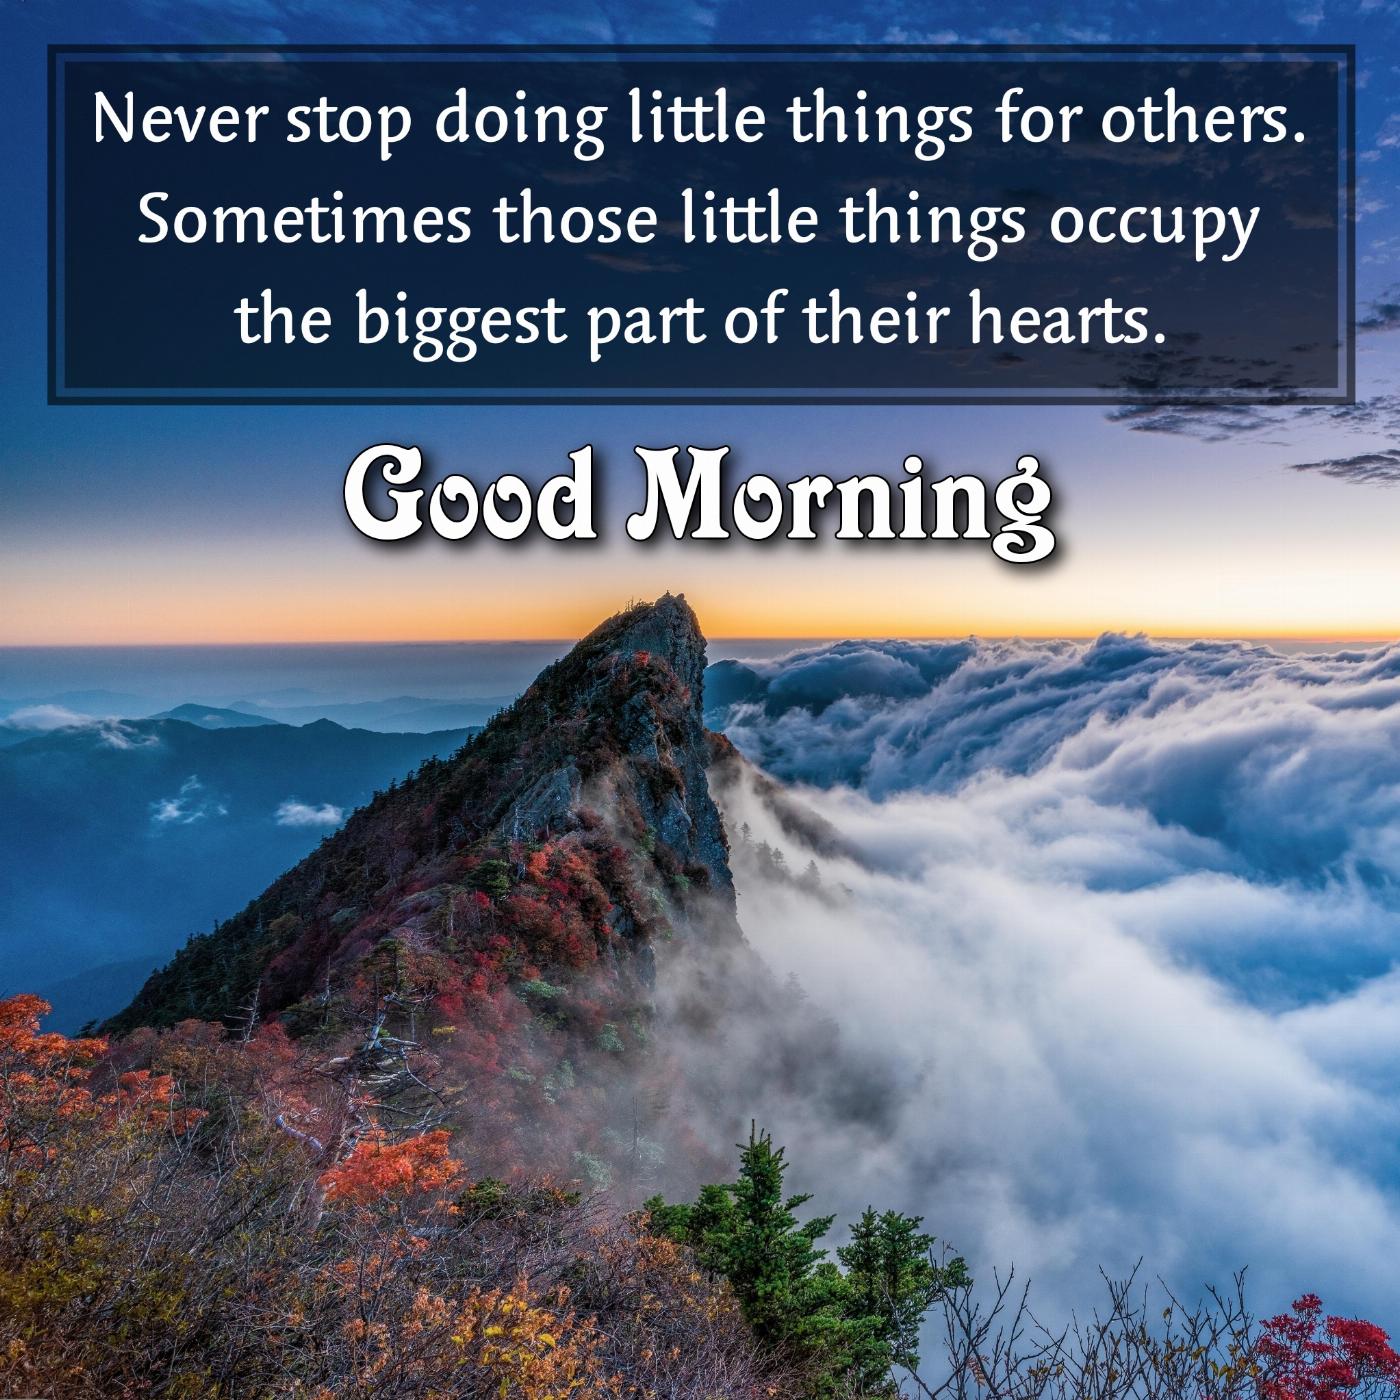 Never stop doing little things for others